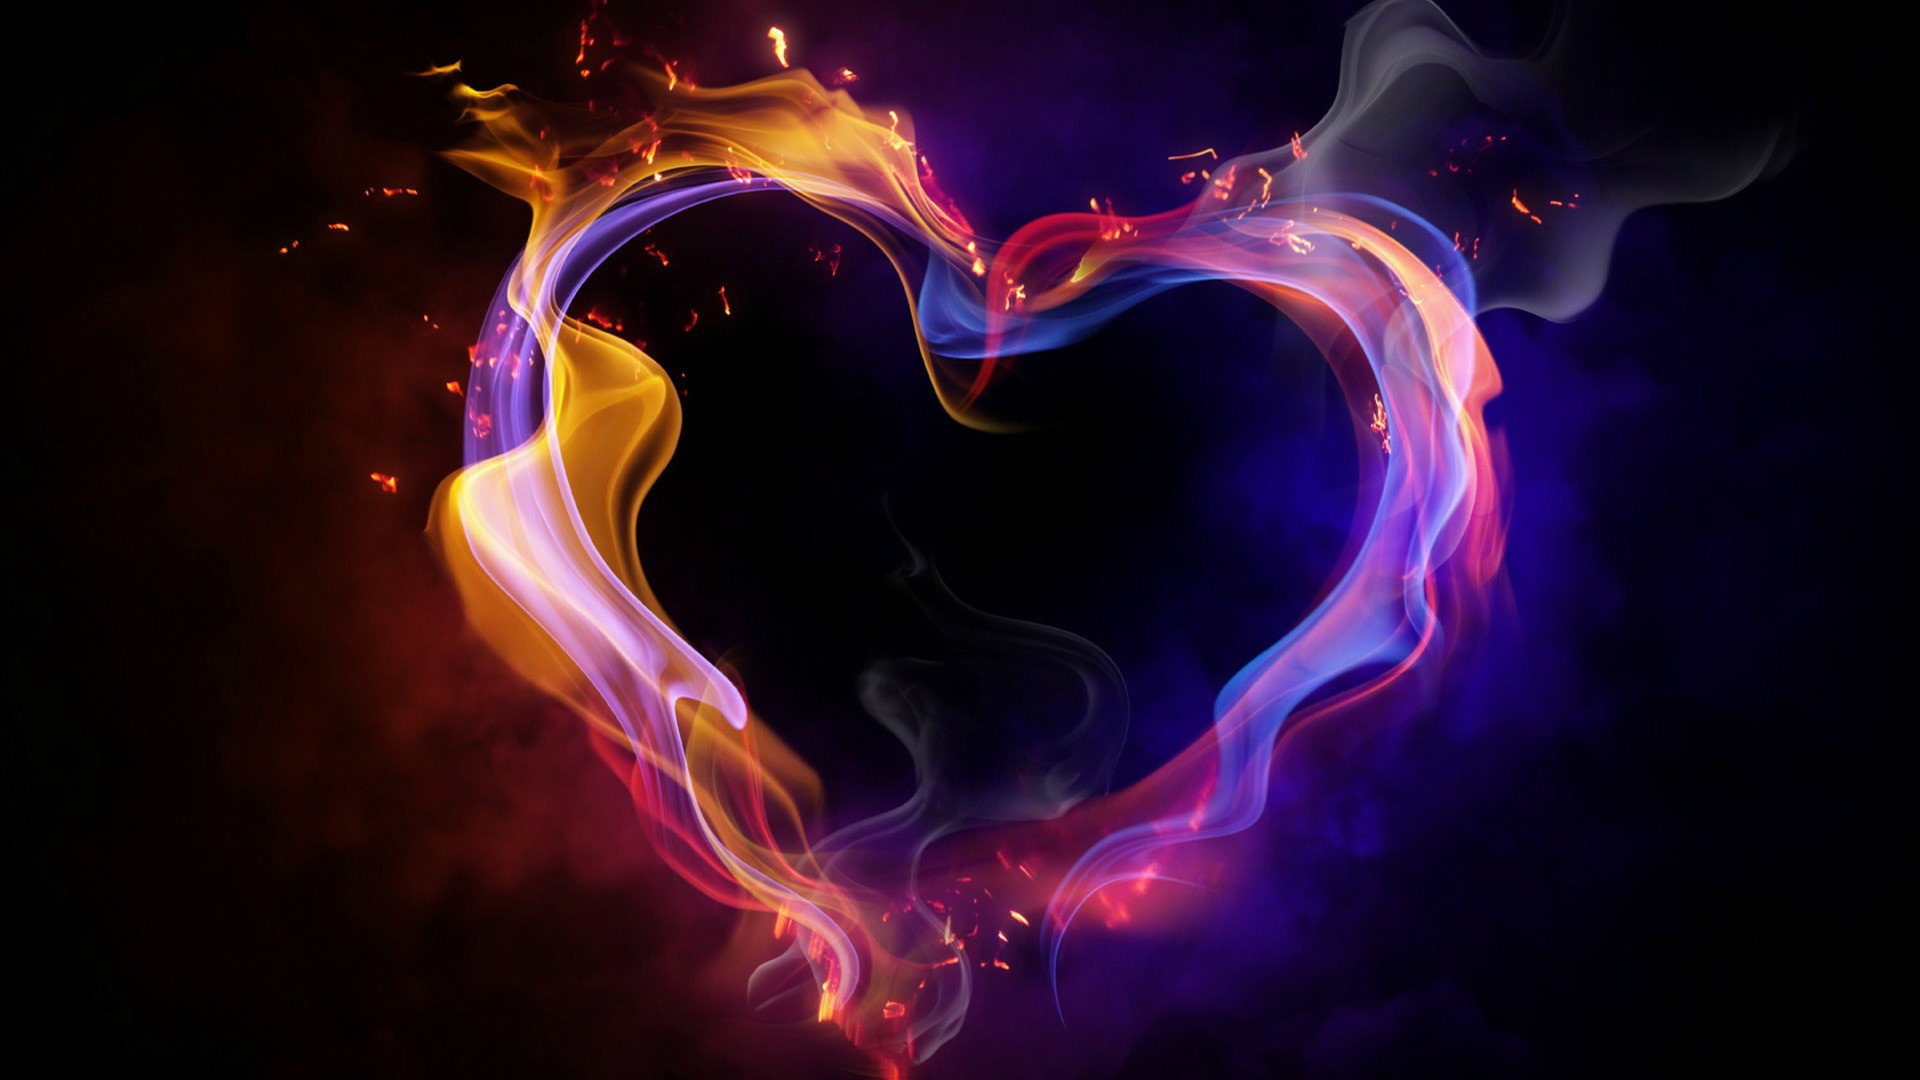 Hd 1920x1080 Cool Color Abstract Heart Desktop Wallpapers Backgrounds